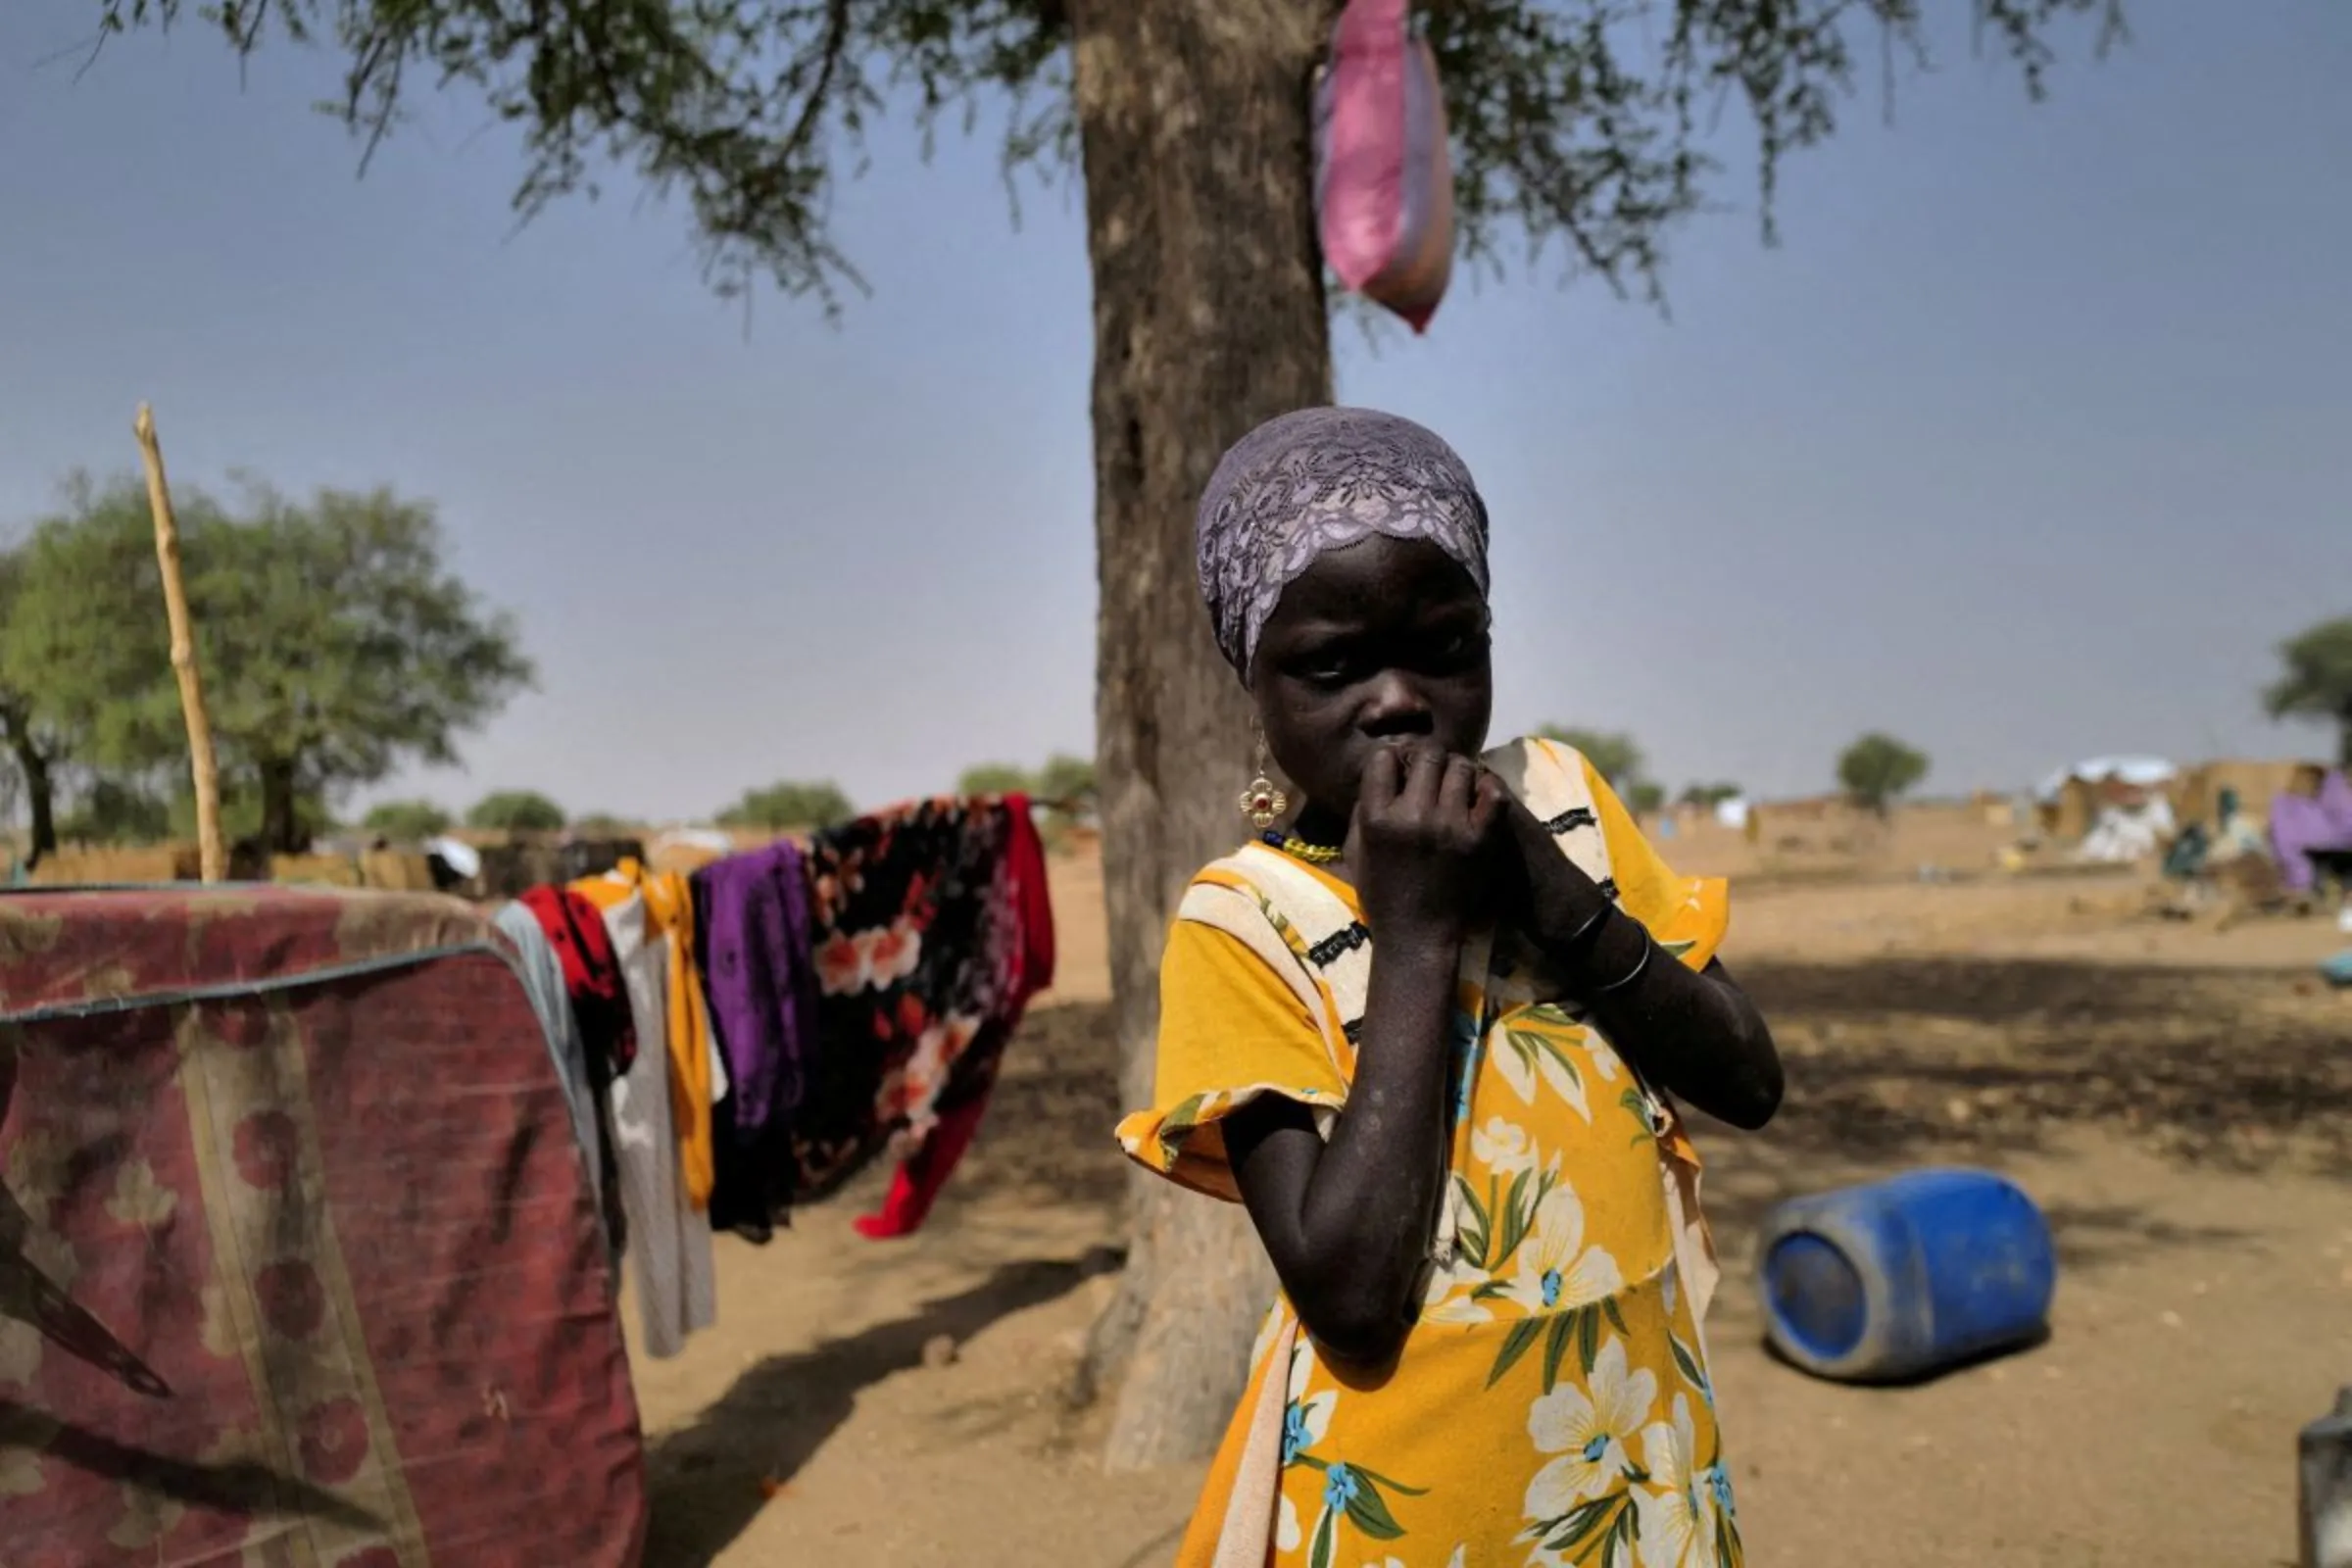 A Sudanese refugee who has fled the violence in Sudan's Darfur region, looks on as she stands by her shelter, near the border between Sudan and Chad in Koufroun, Chad May 15, 2023